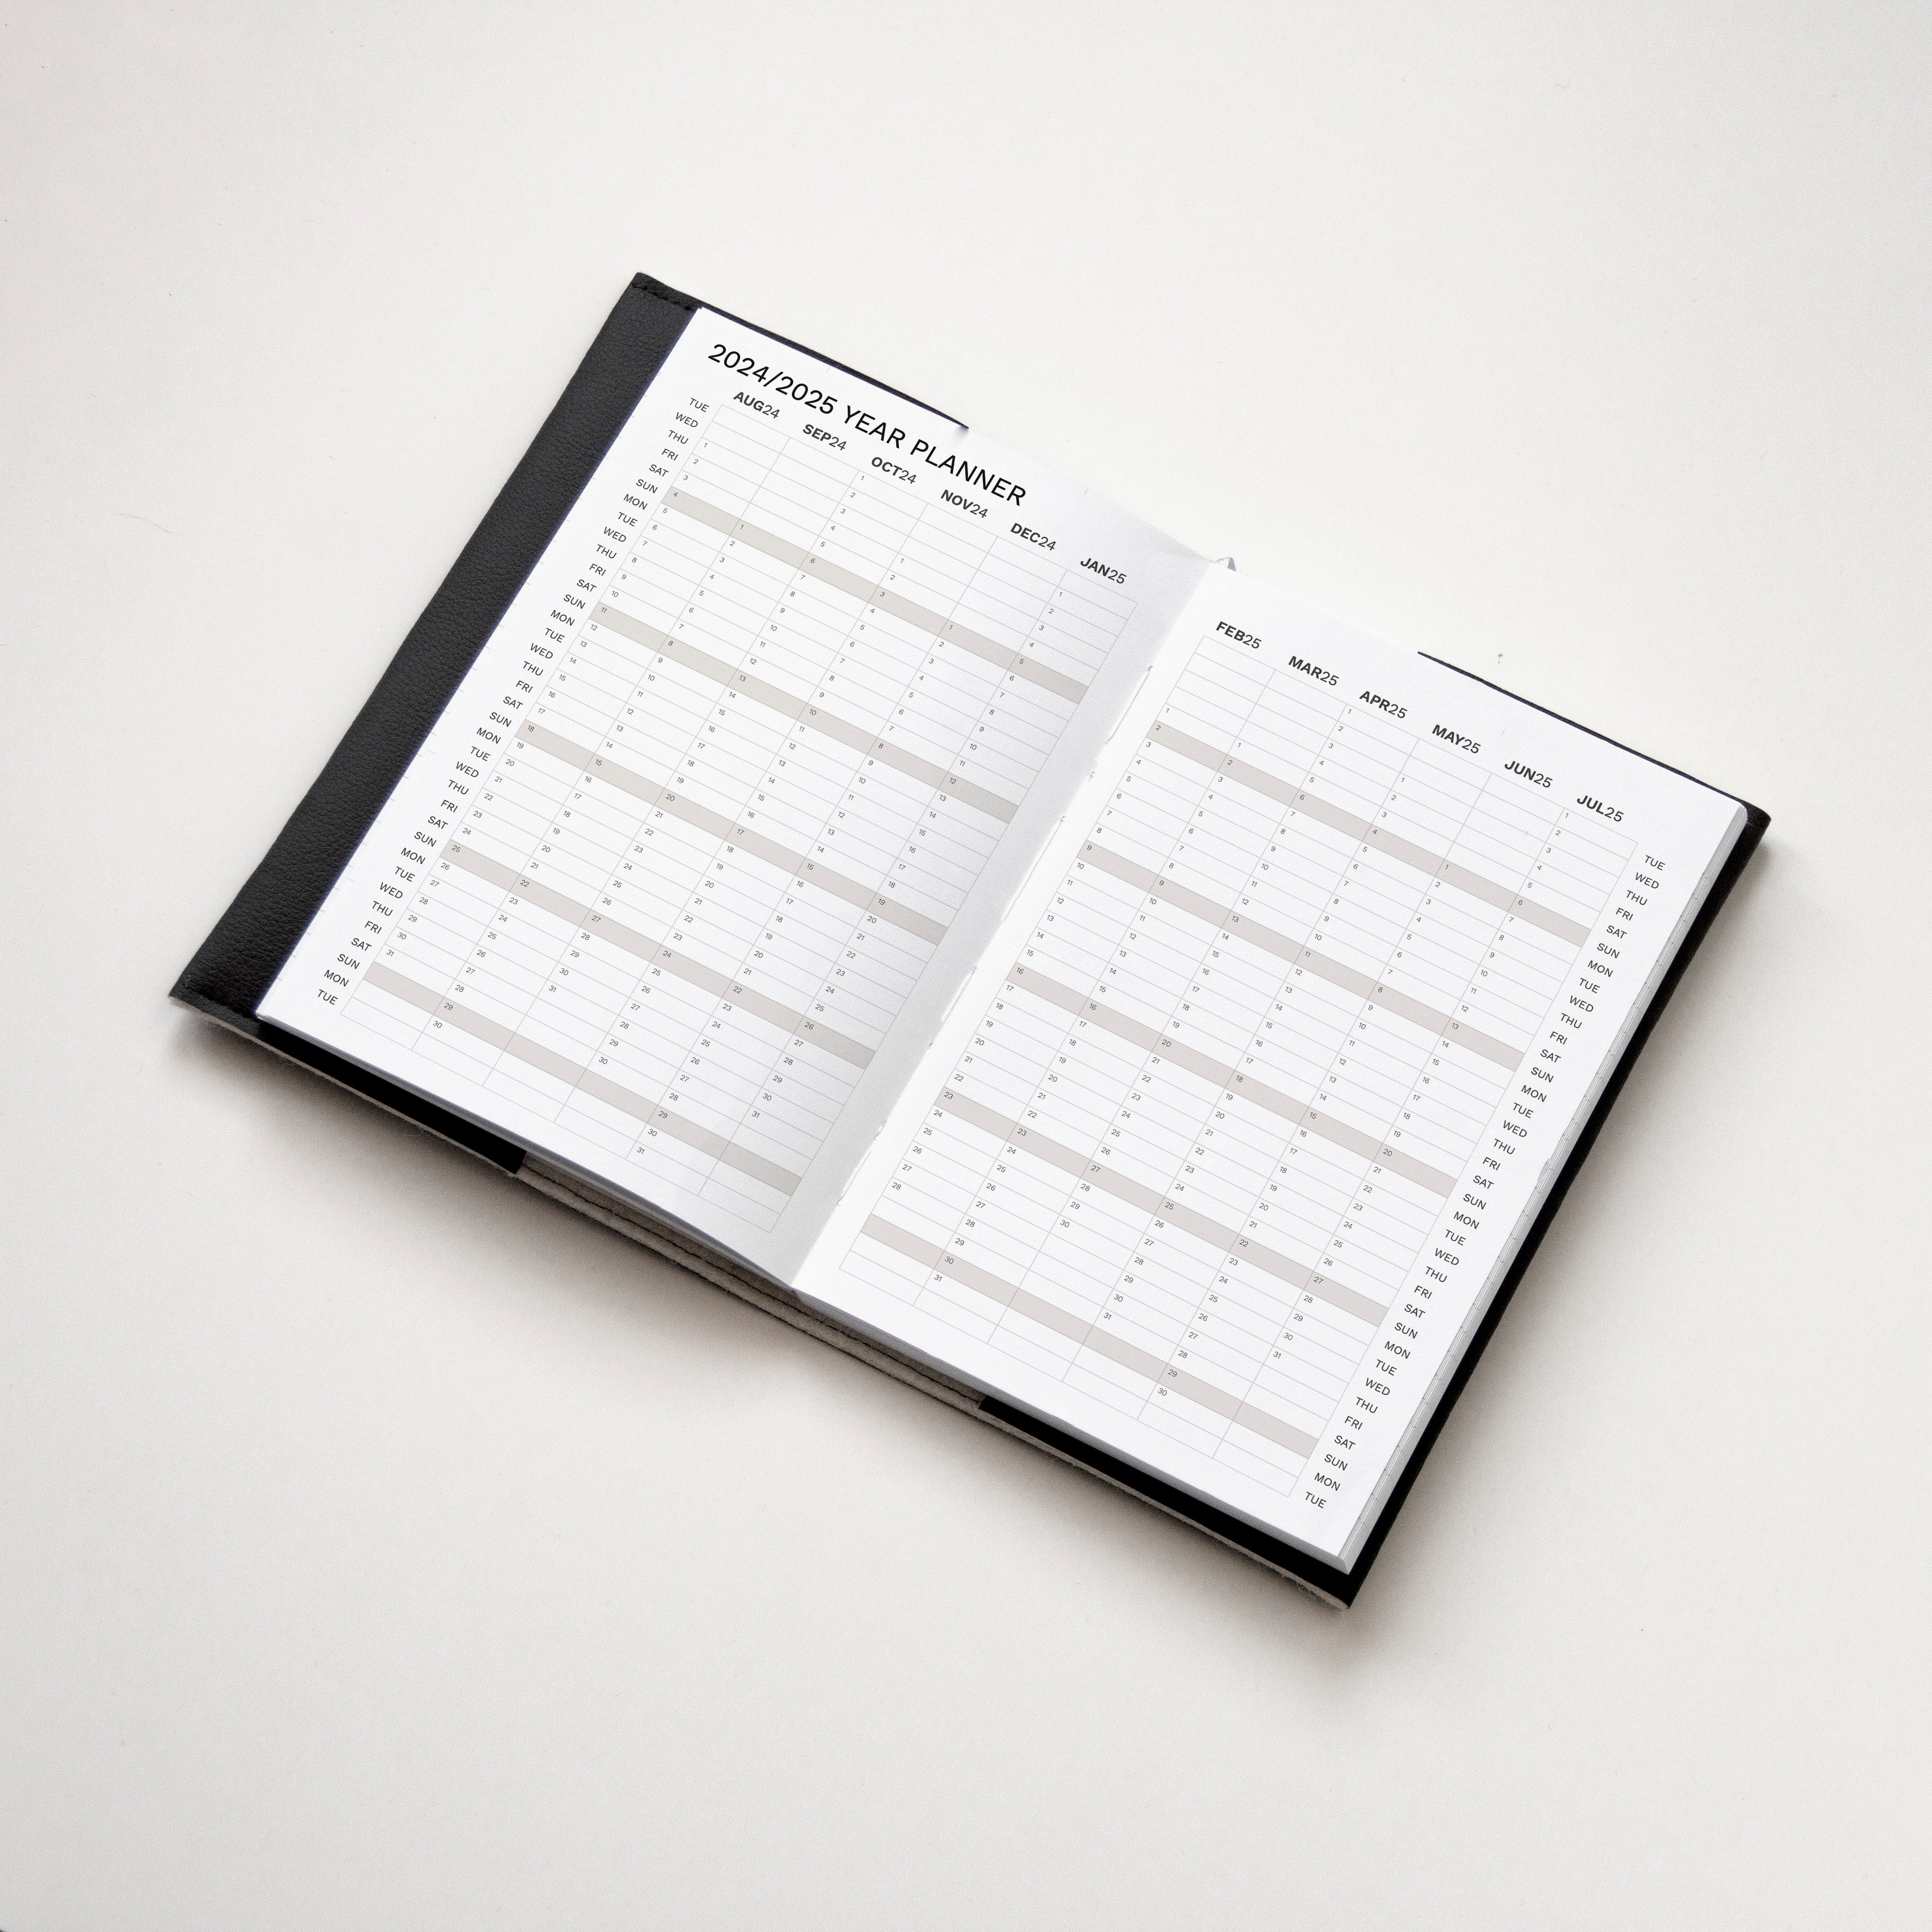 Year Planner - 2024/2025 PRO Weekly Planner Similar A5 size from Octàgon Design